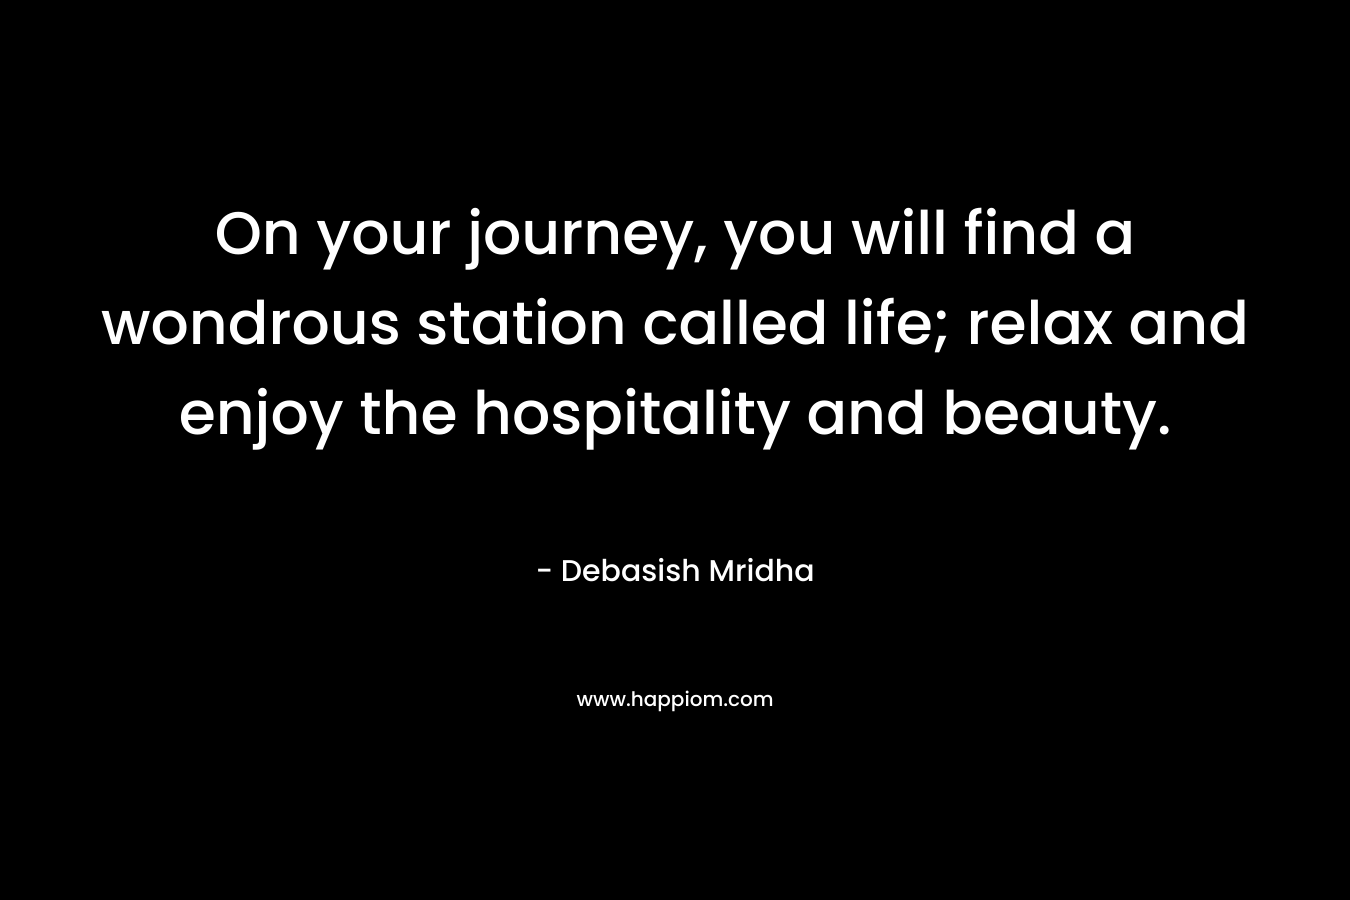 On your journey, you will find a wondrous station called life; relax and enjoy the hospitality and beauty. – Debasish Mridha